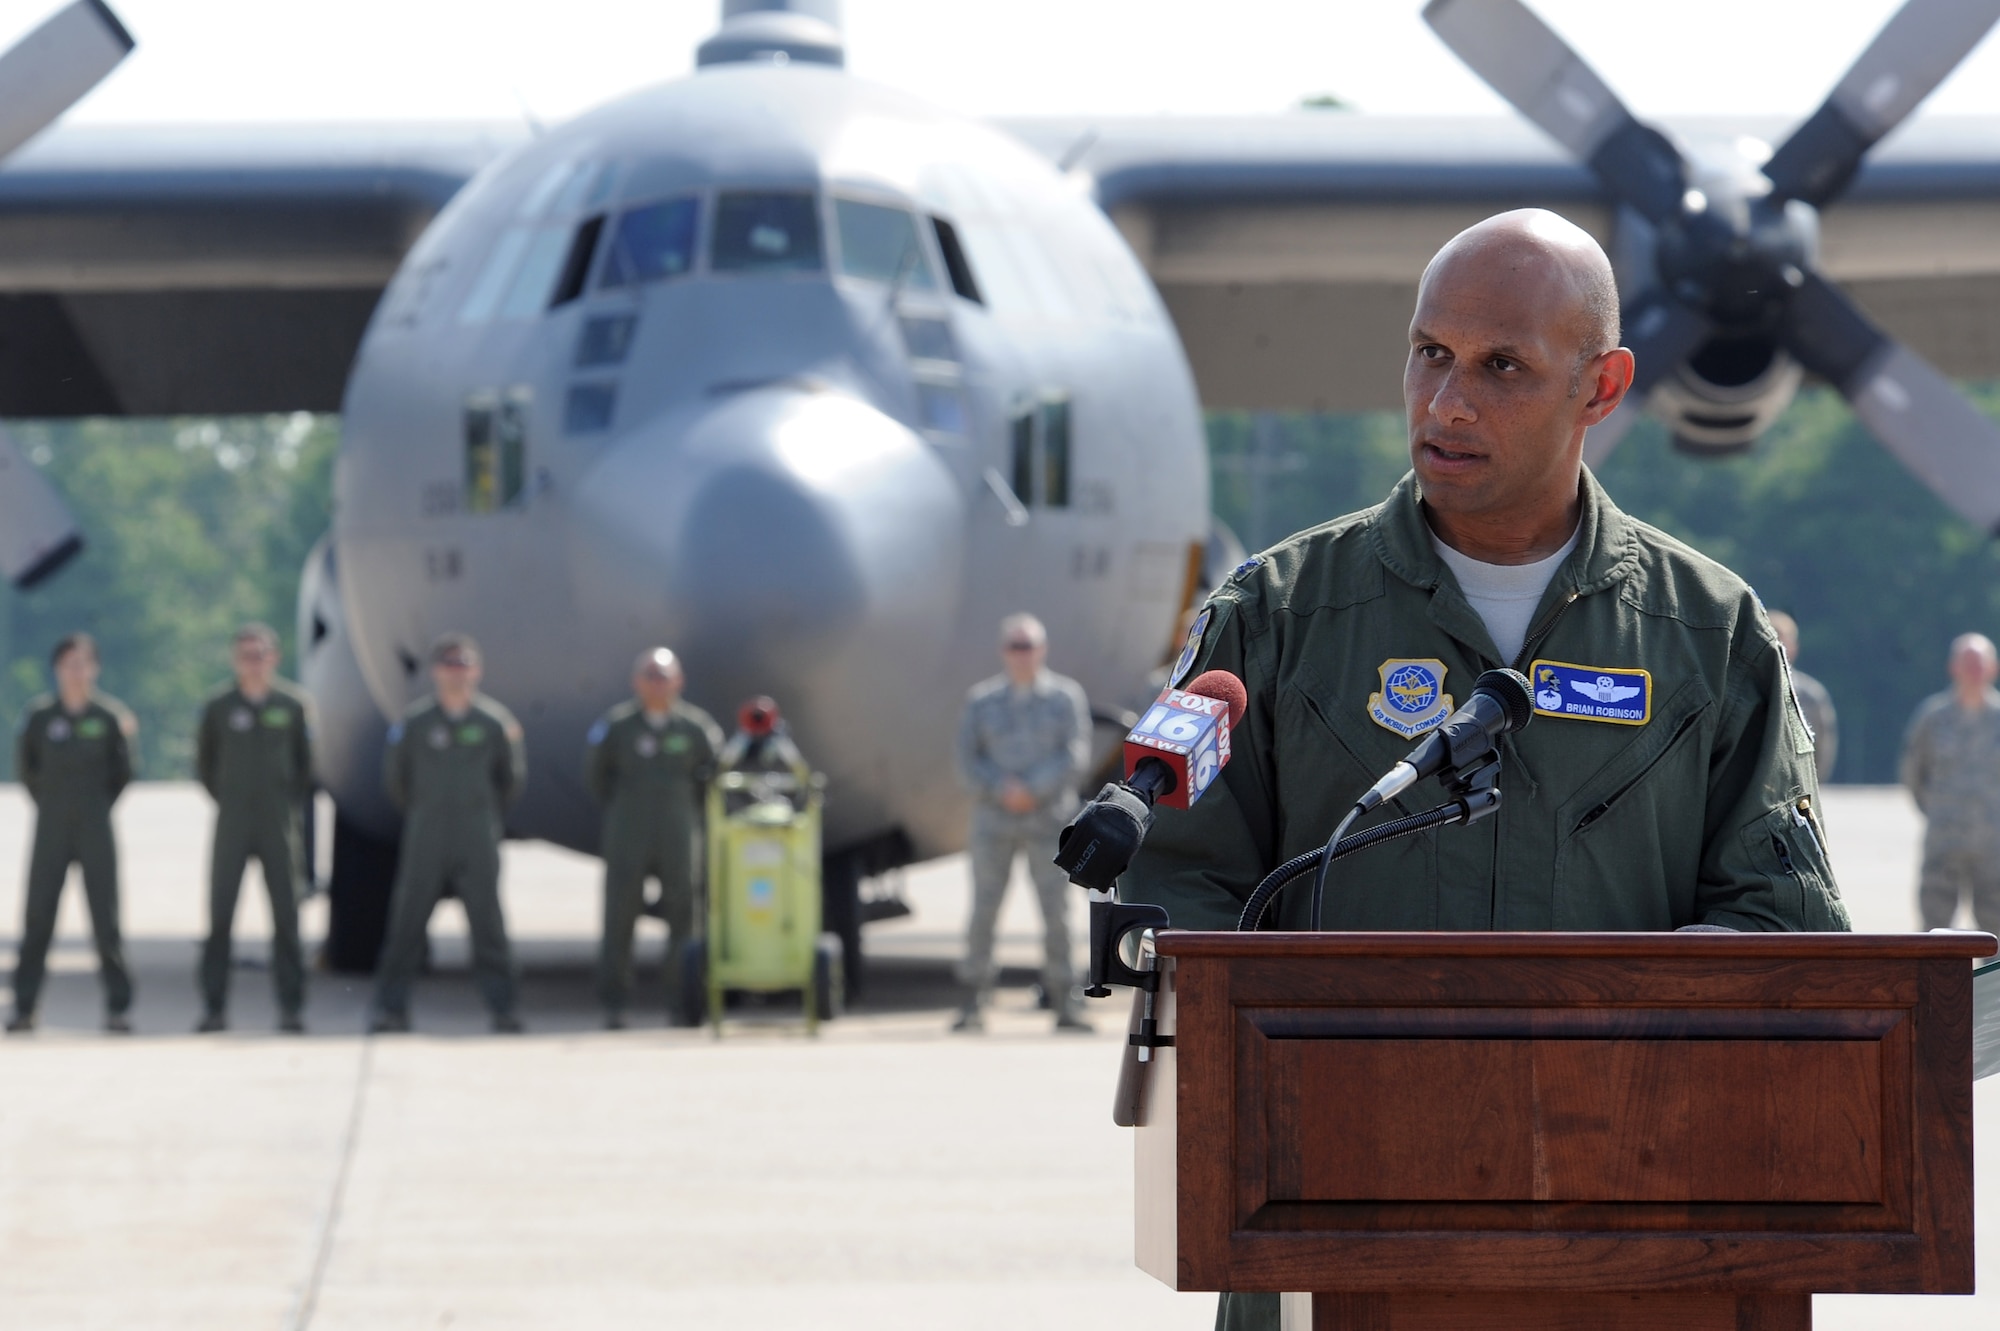 Col. Brian Robinson, 19th Airlift Wing commander, speaks to an audience attending the retirement of C130E 61-2358, May 1, 2012, at Little Rock Air Force Base, Ark. (U.S. Air Force photo by Tech. Sgt. Chad Chidholm)